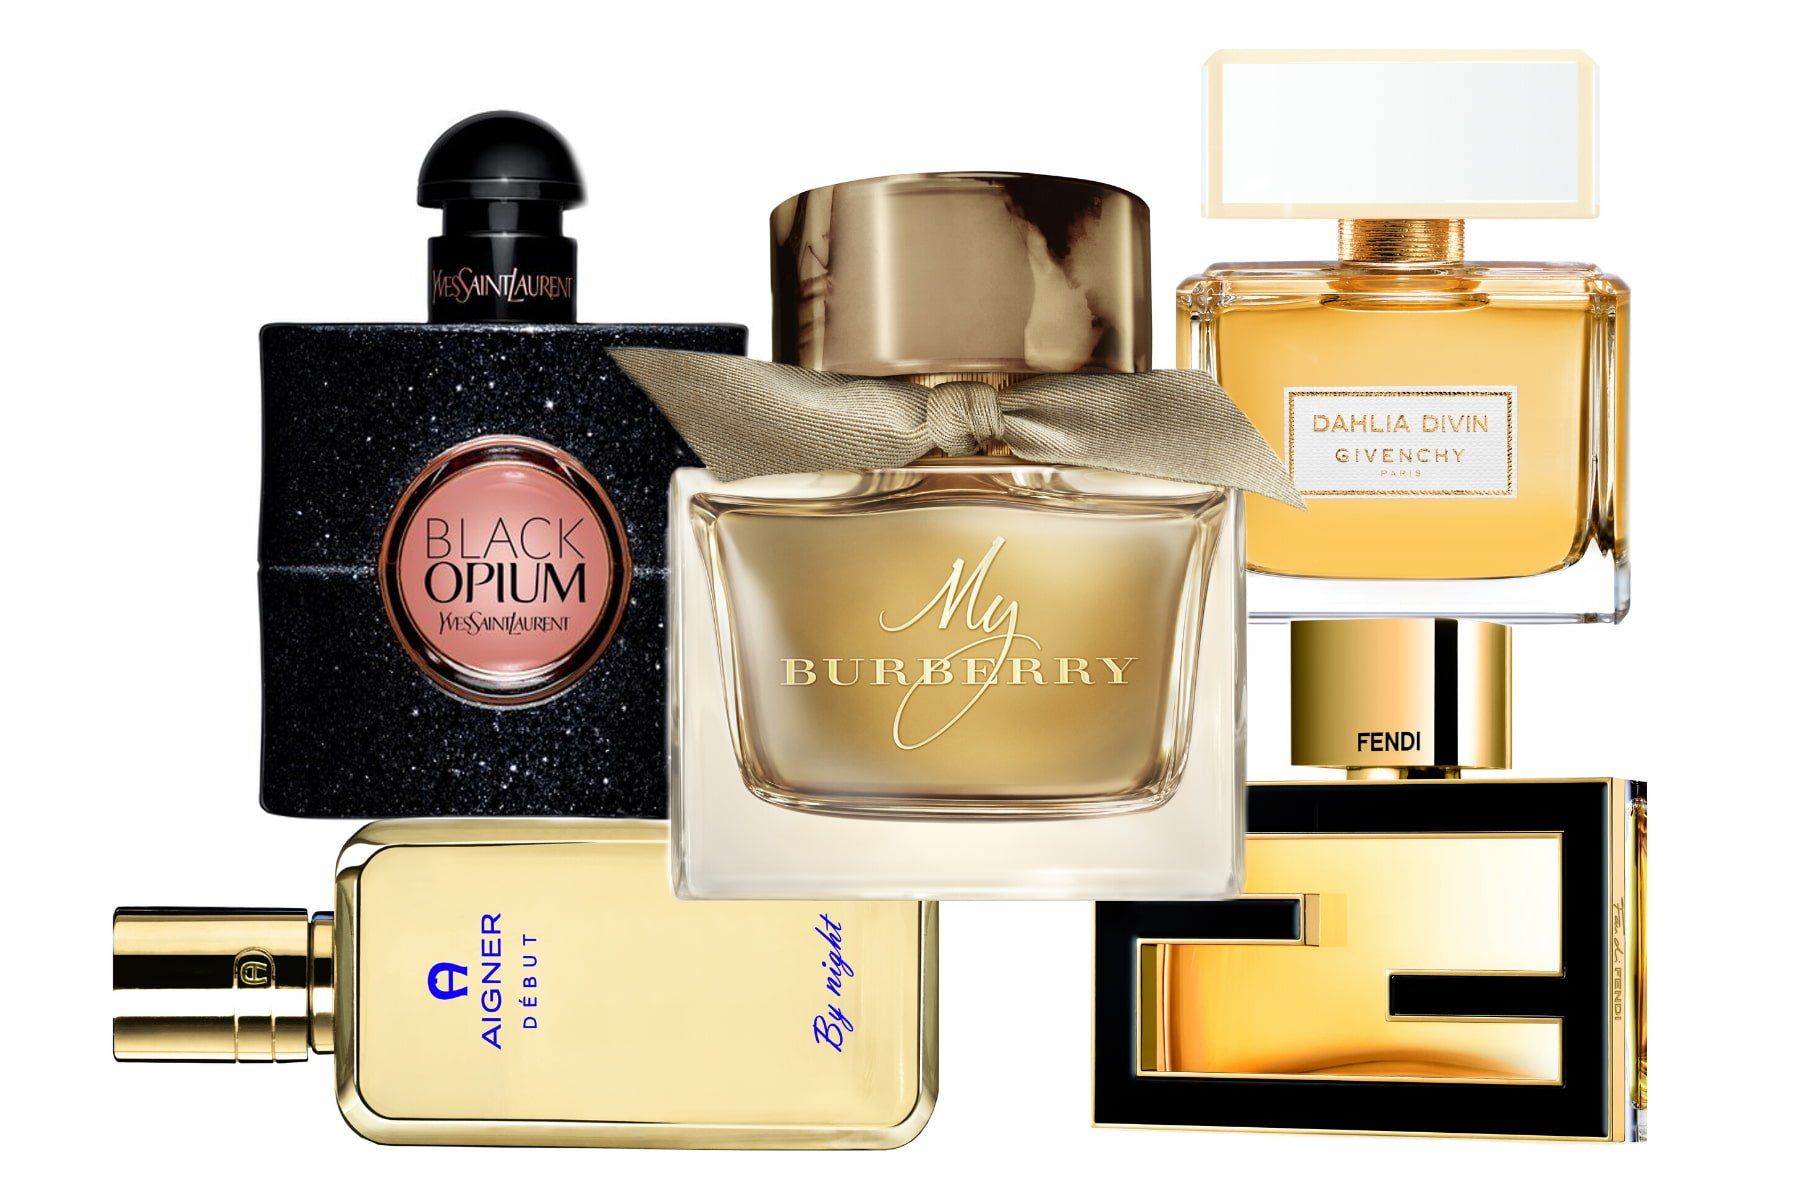 wissen-ist-mehr-top-herbstduefte-edel-ysl-yves-saint-laurent-black-opium-aigner-debut-by-night-my-burberry-givenchy-dahlia-divin-fan-di-fendi-extreme